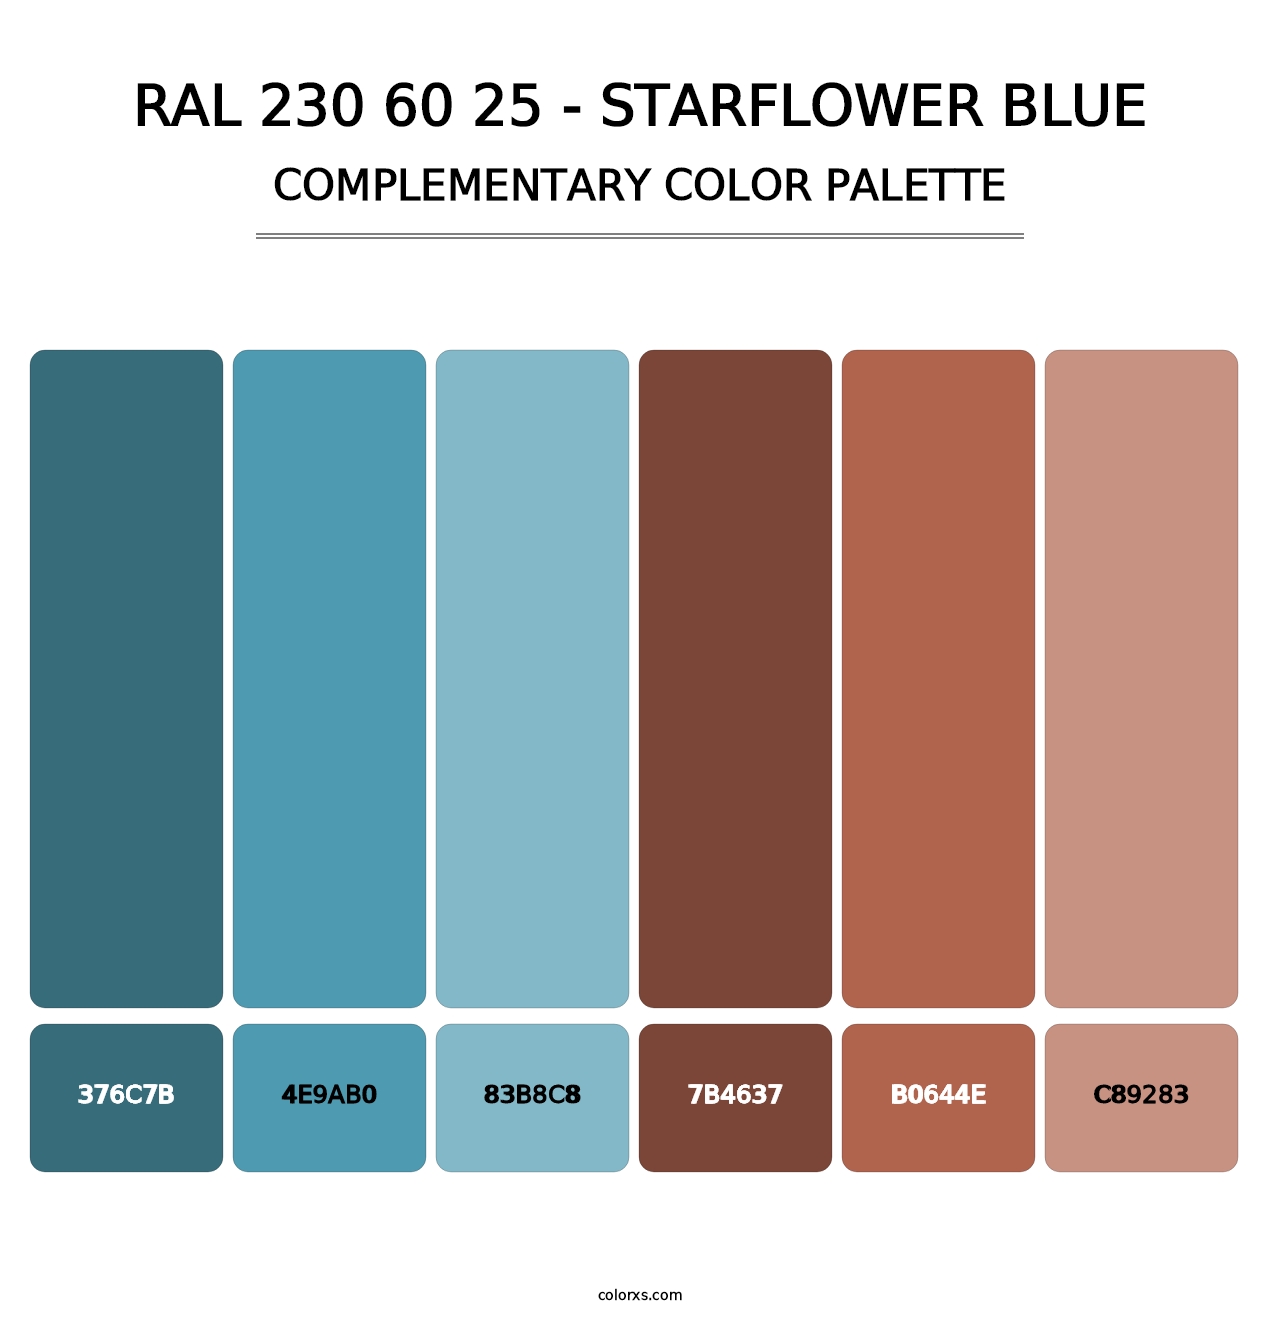 RAL 230 60 25 - Starflower Blue - Complementary Color Palette